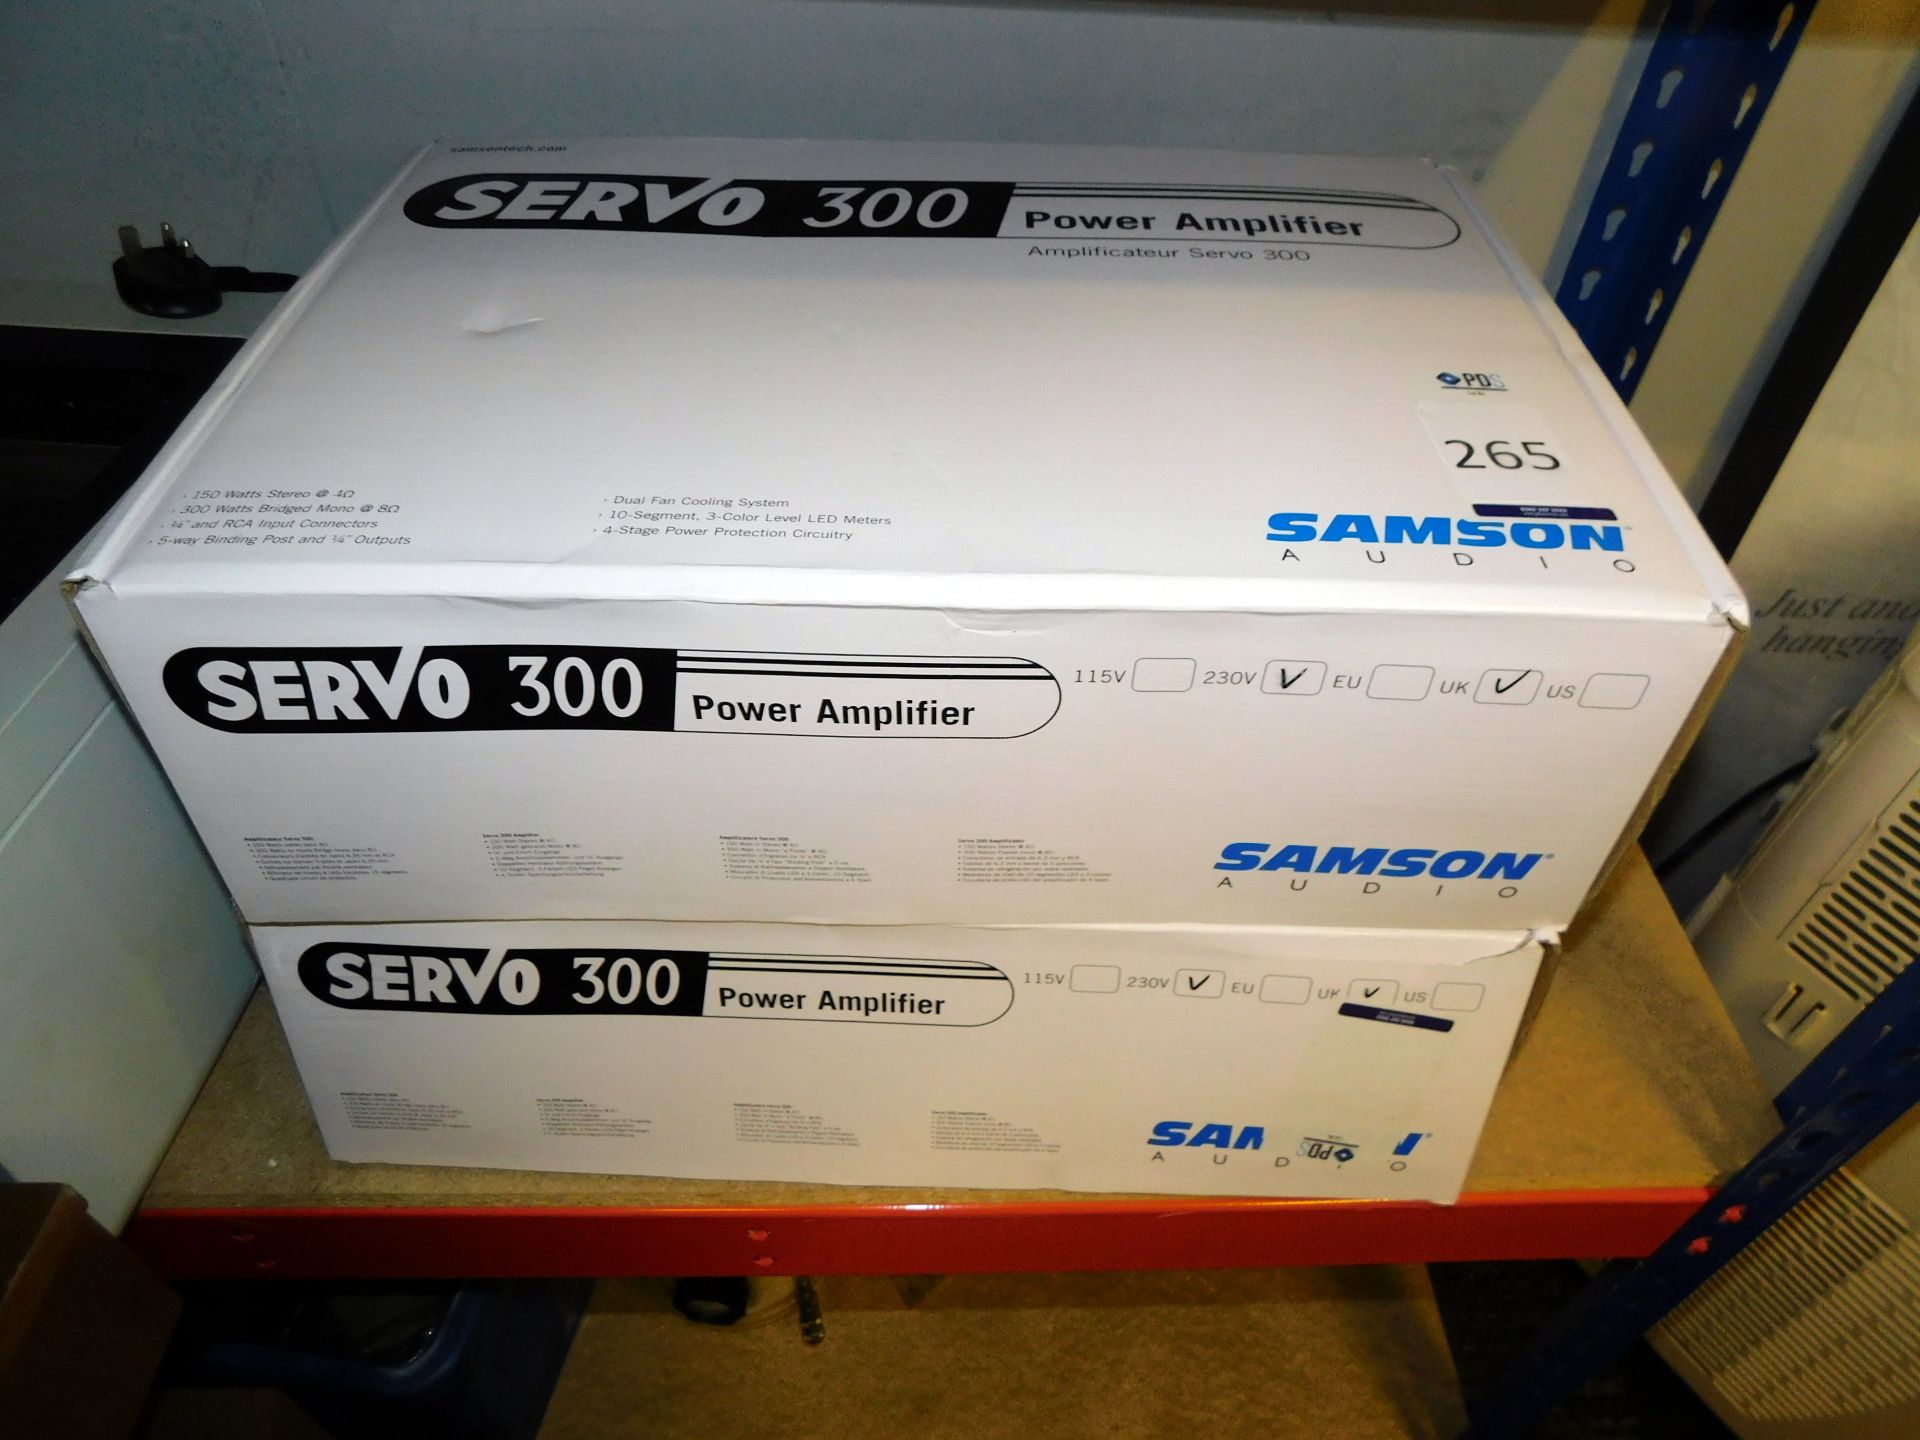 2 Samson Servo 300 Power Amplifiers, New & Boxed (Located Upminster – See General Notes for Full